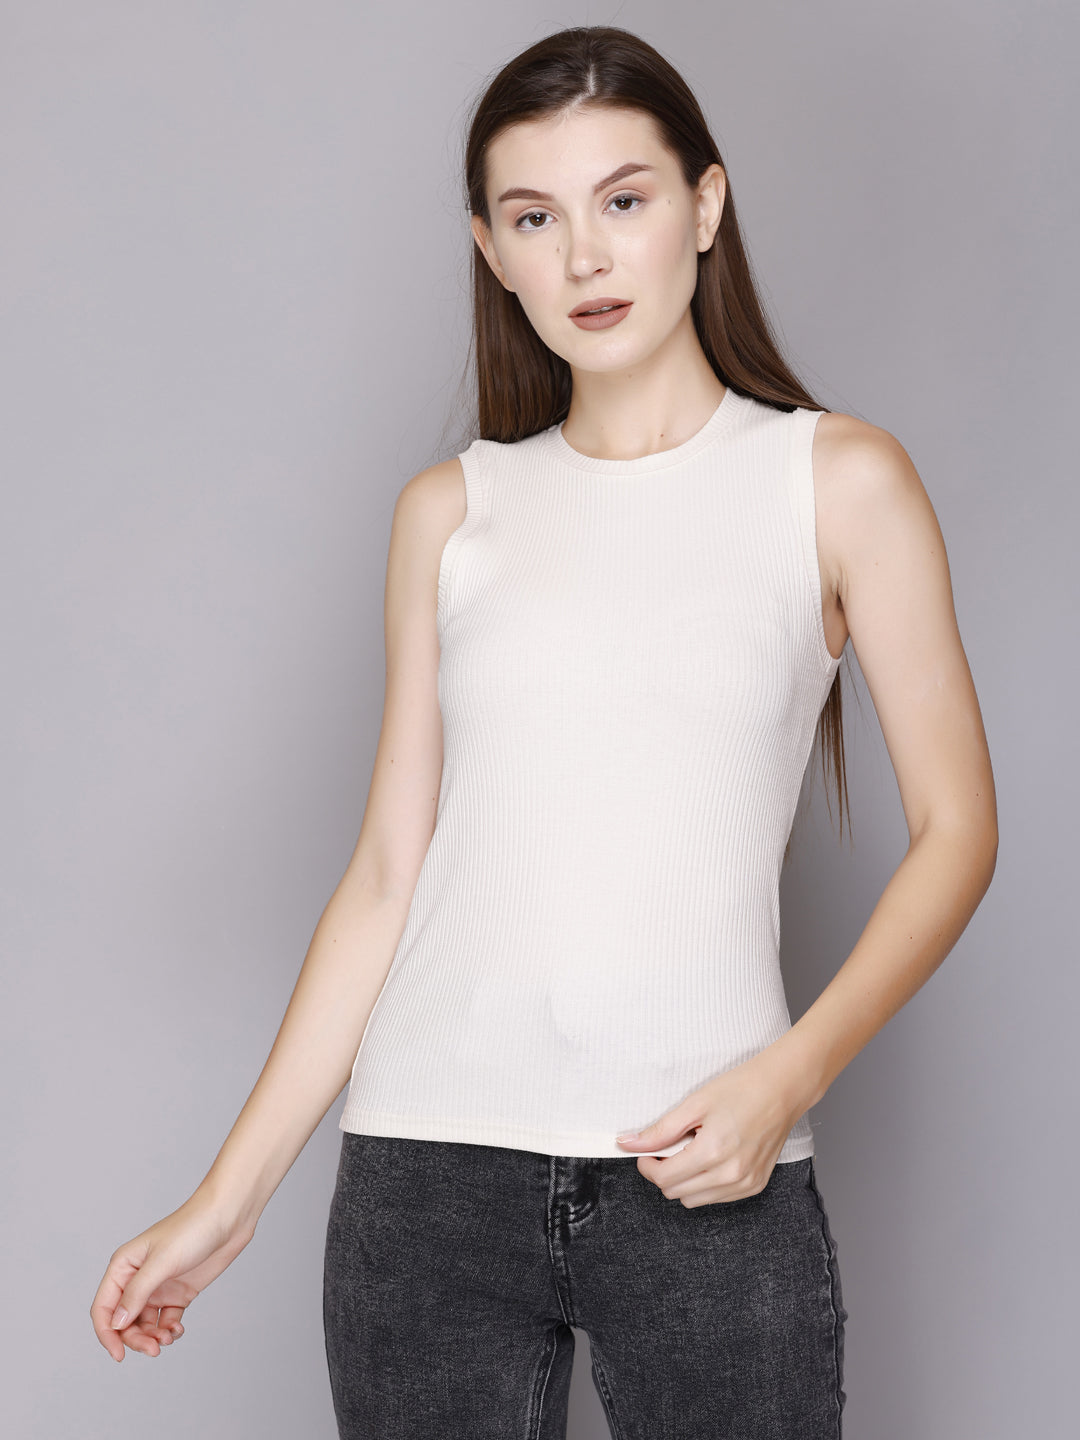 Stylish Modish Rib Tank Top For Women/ Girls Online At Best Prices